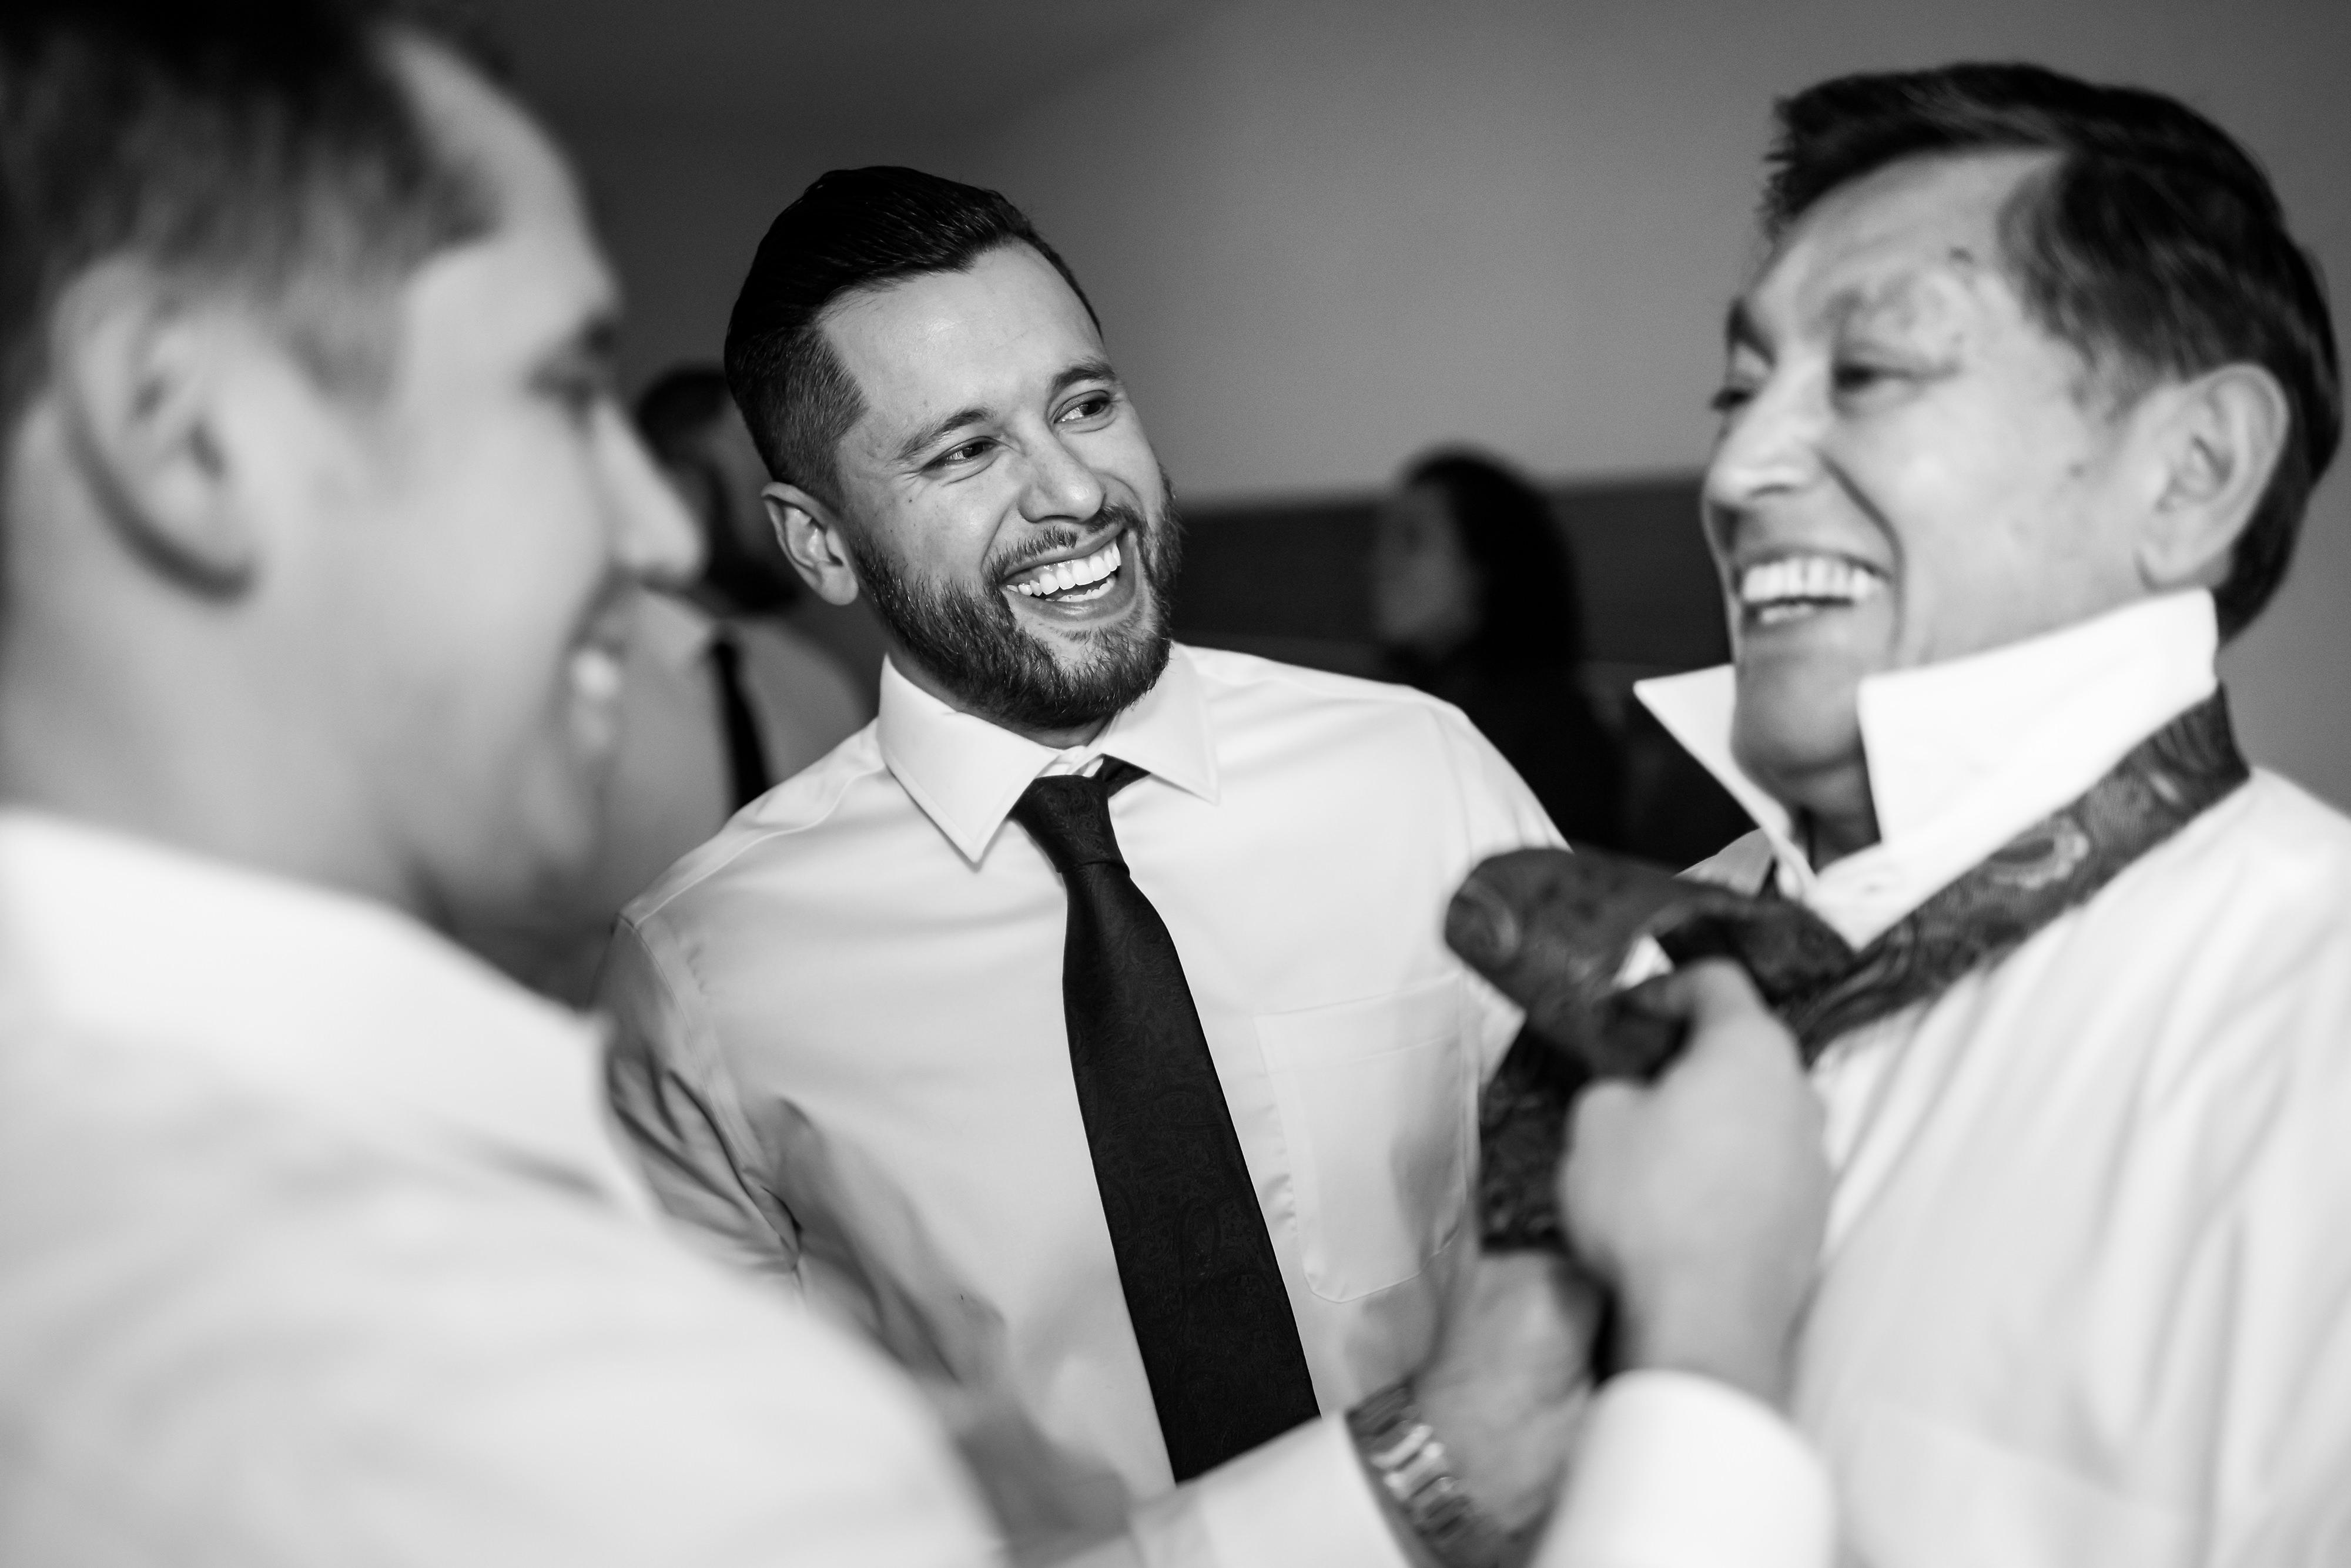 Groom and groomsmen put on ties while getting ready for wedding